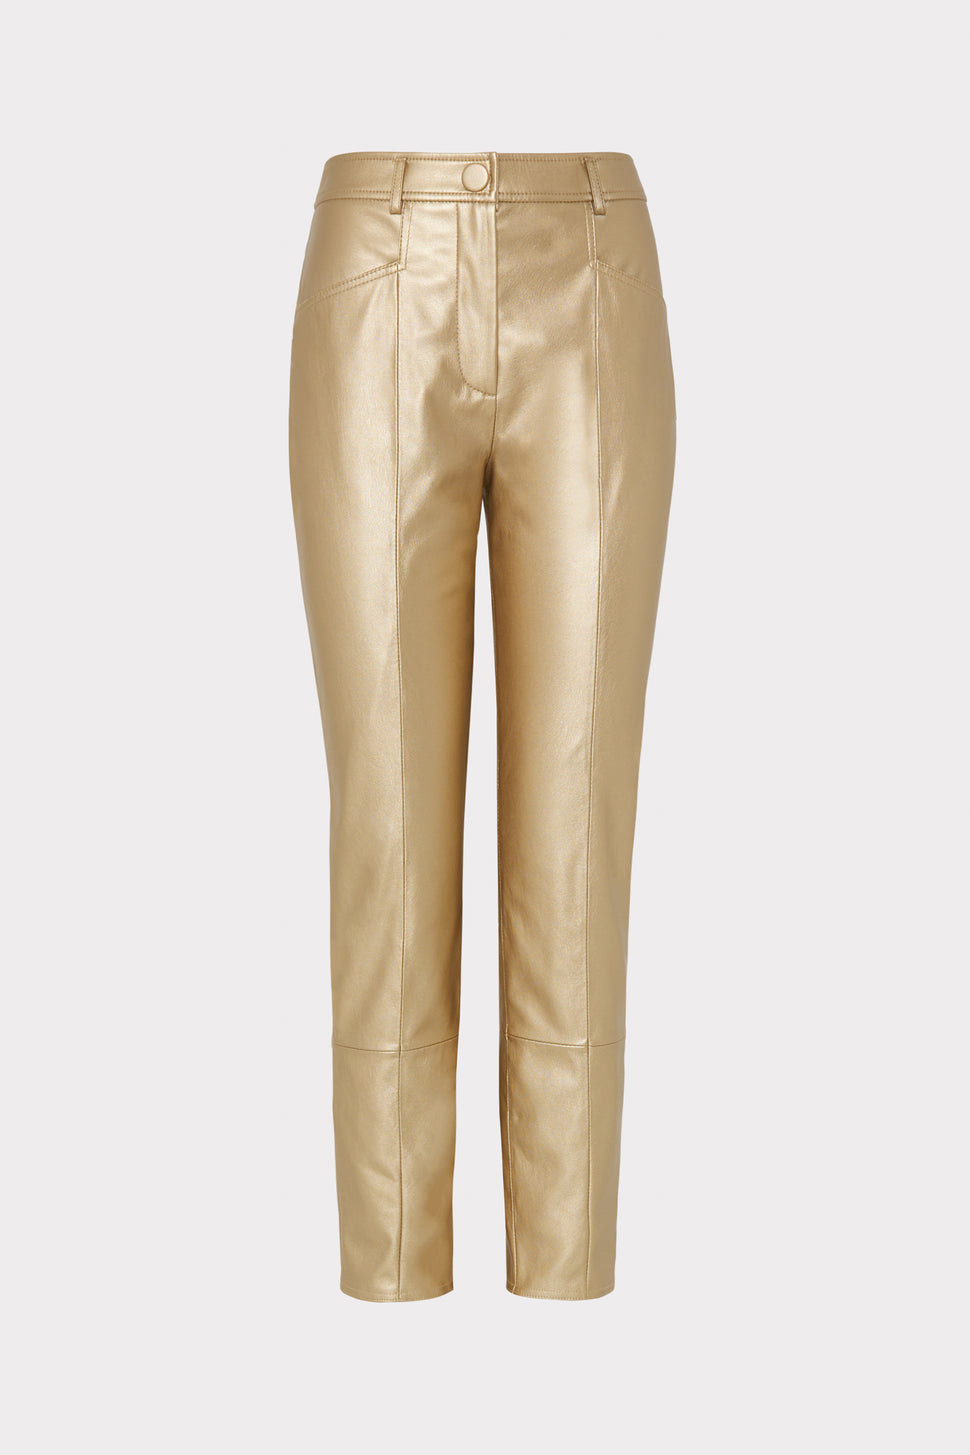 Rue Vegan Leather Pants in Gold